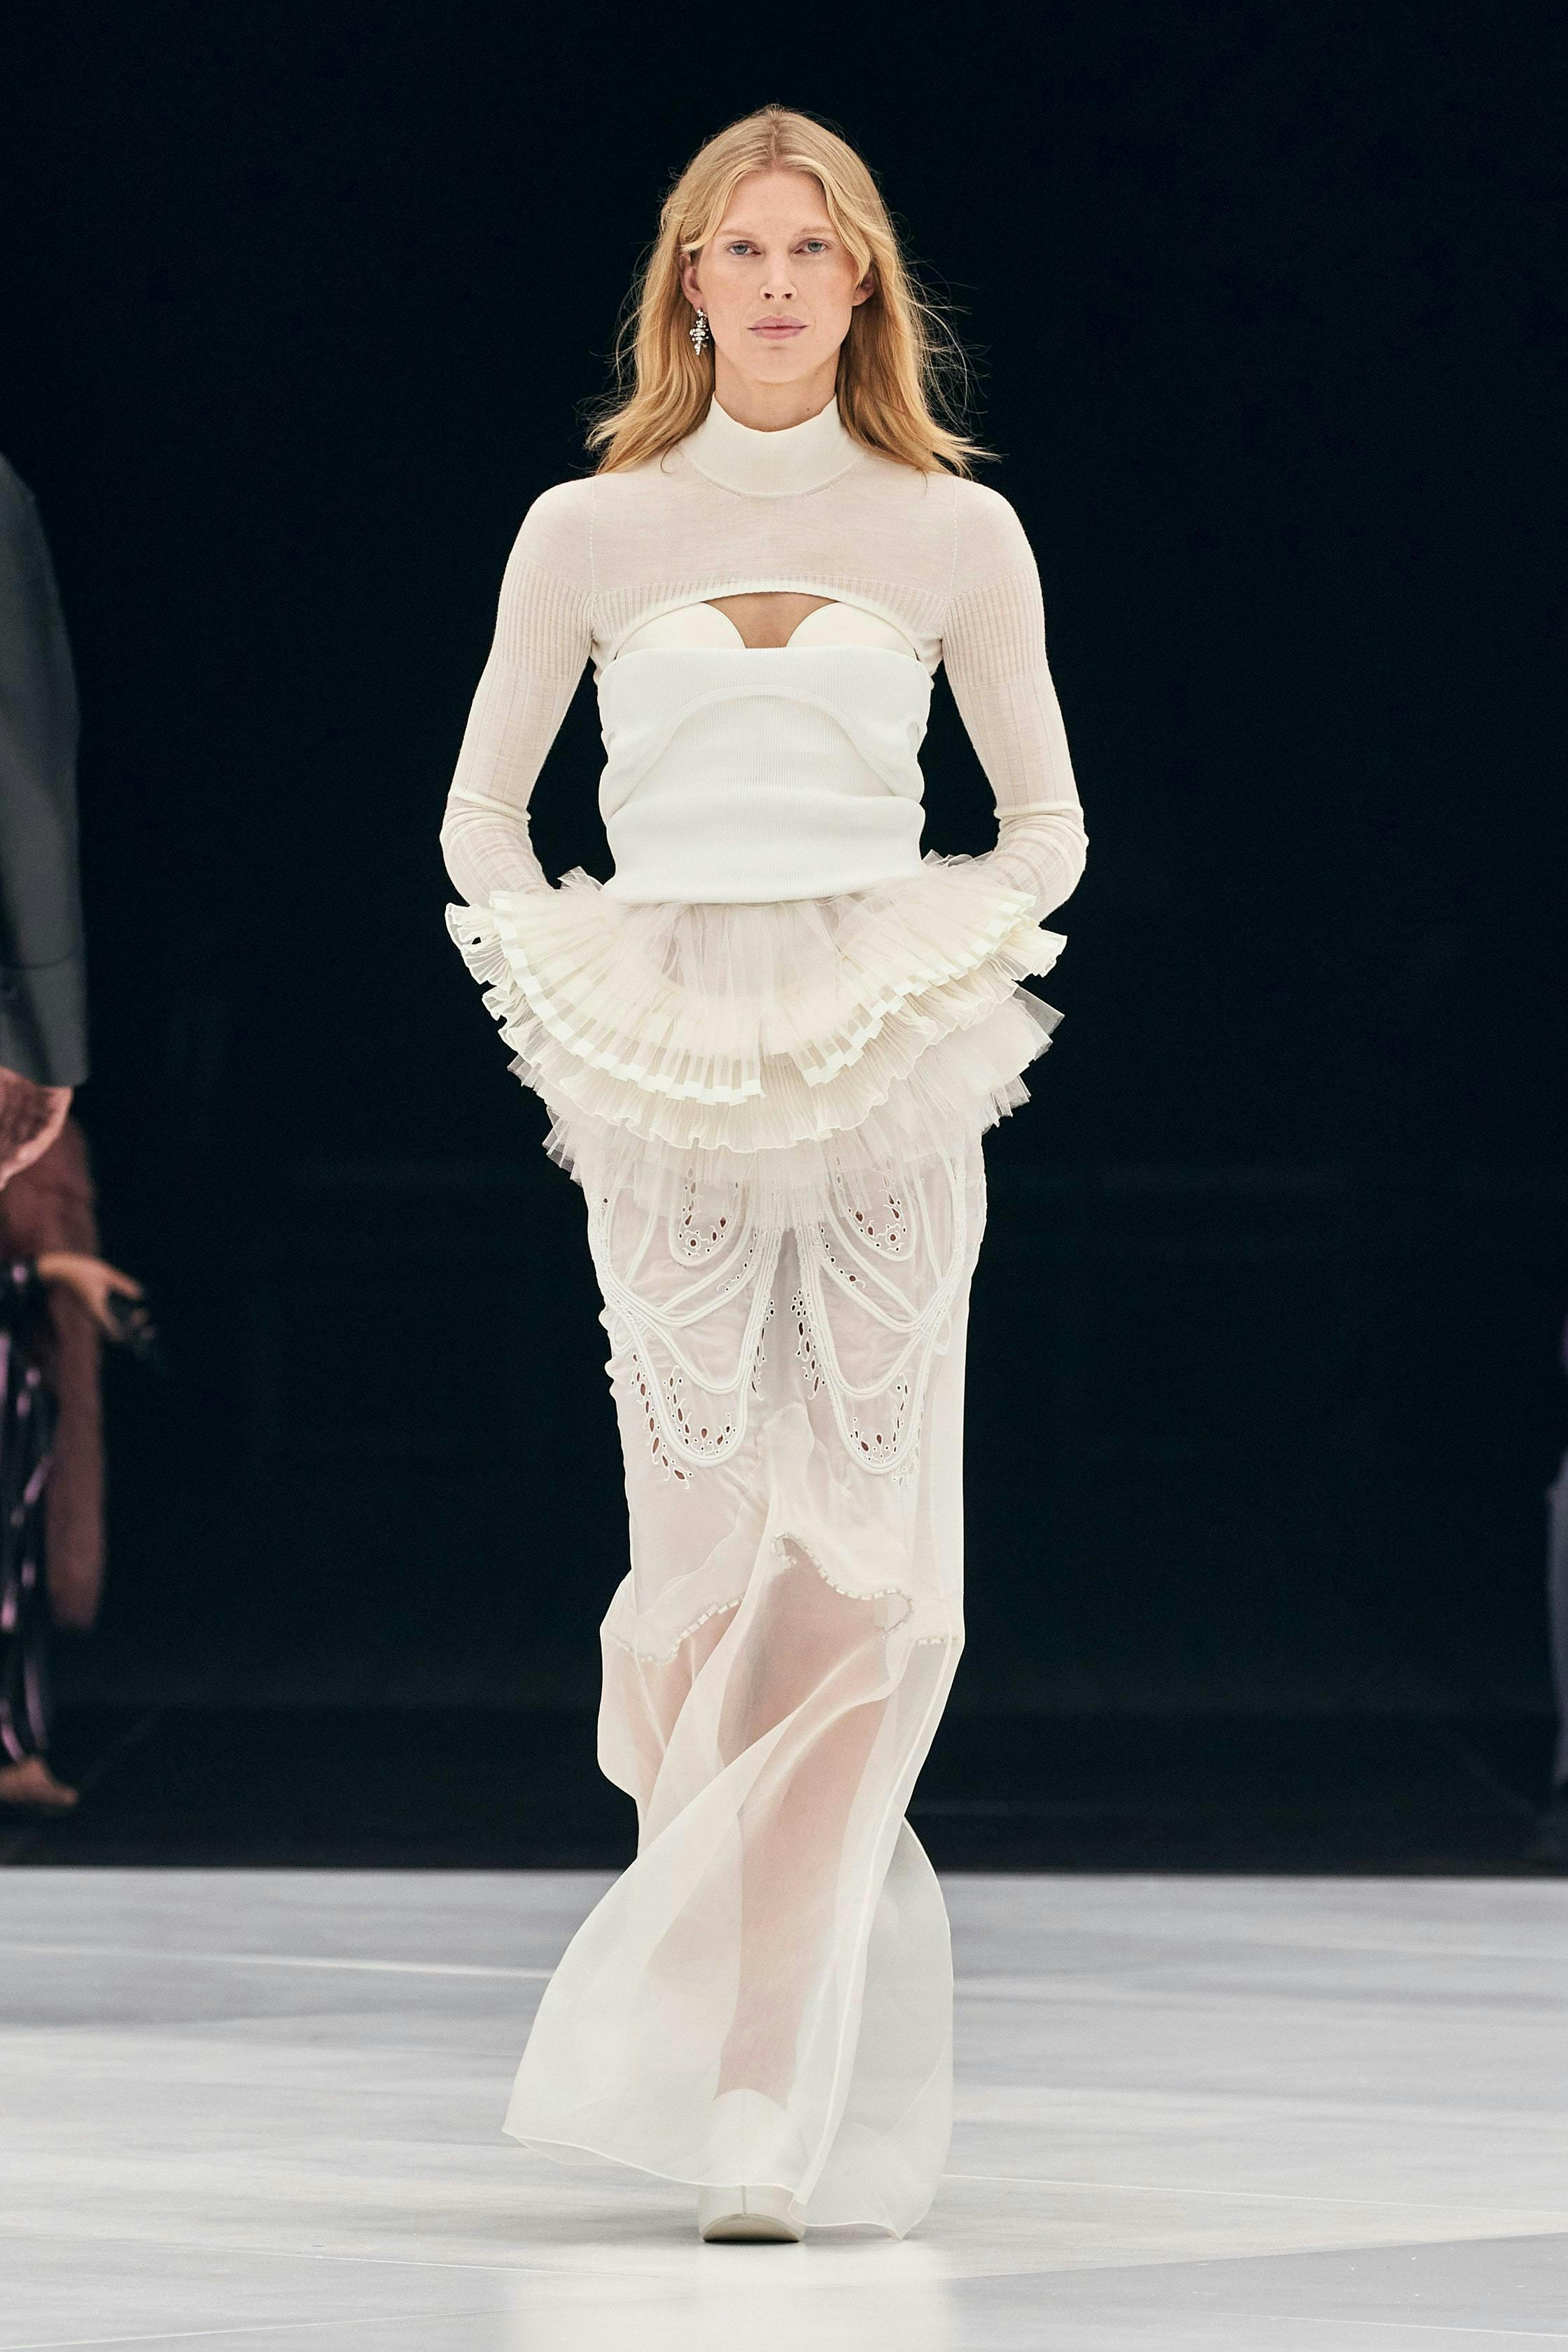 The  model wears a white top, a white drop shoulder cropped sweater, and a sheer maxi skirt with ruffle detailing and a cut-out pattern.